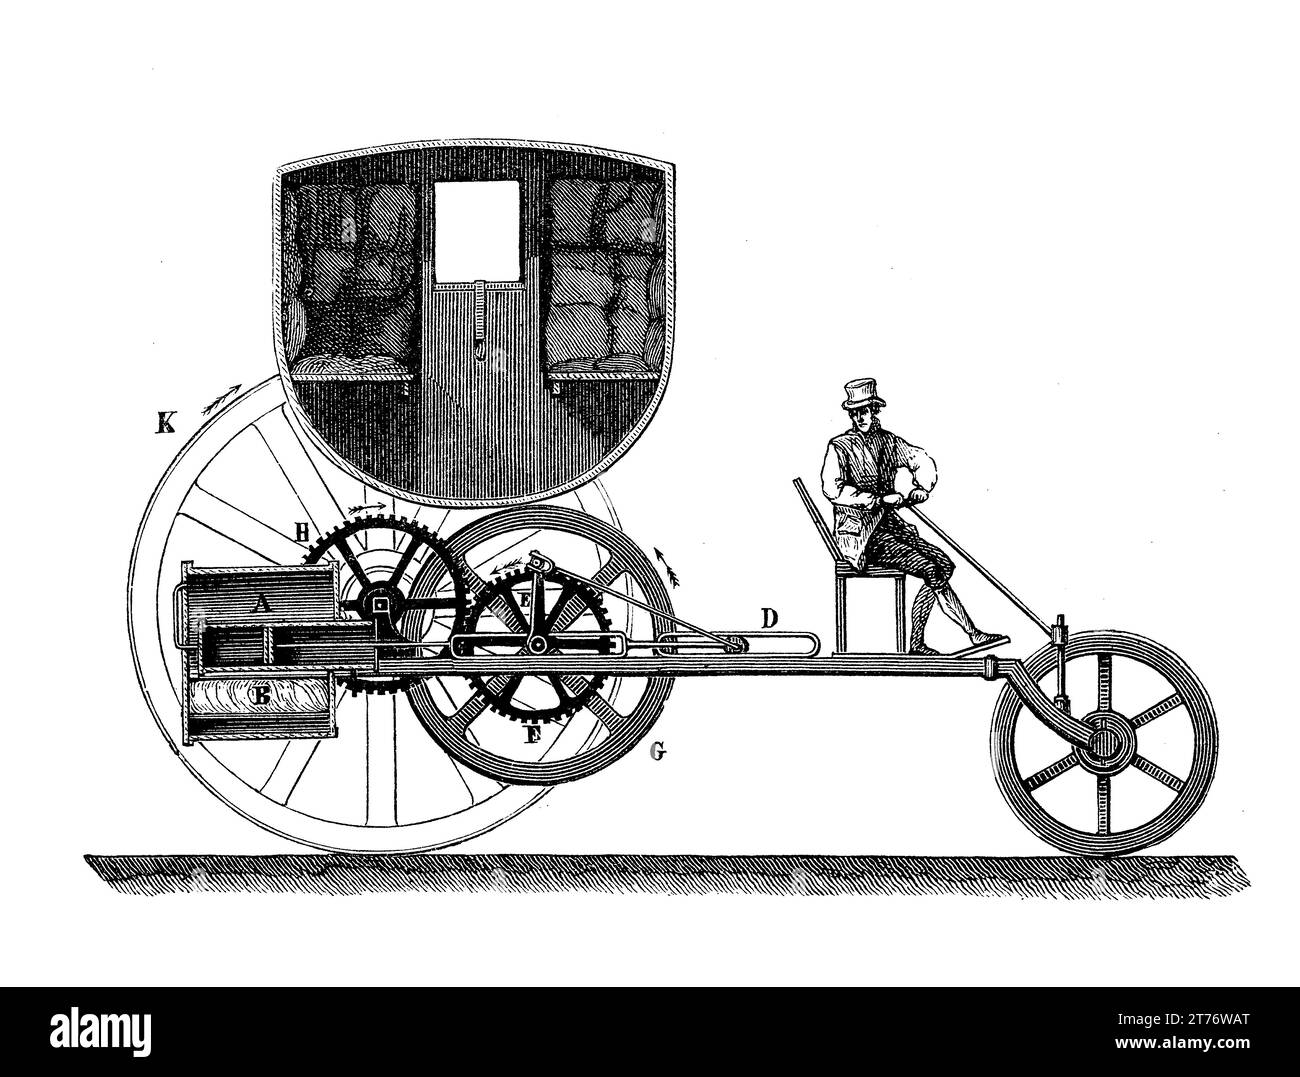 Puffing Devil Steam Carriage  or The London Steam Carriage  an early steam-powered road vehicle constructed by Richard Trevithick and Andrew Vivian in 1801 Stock Photo